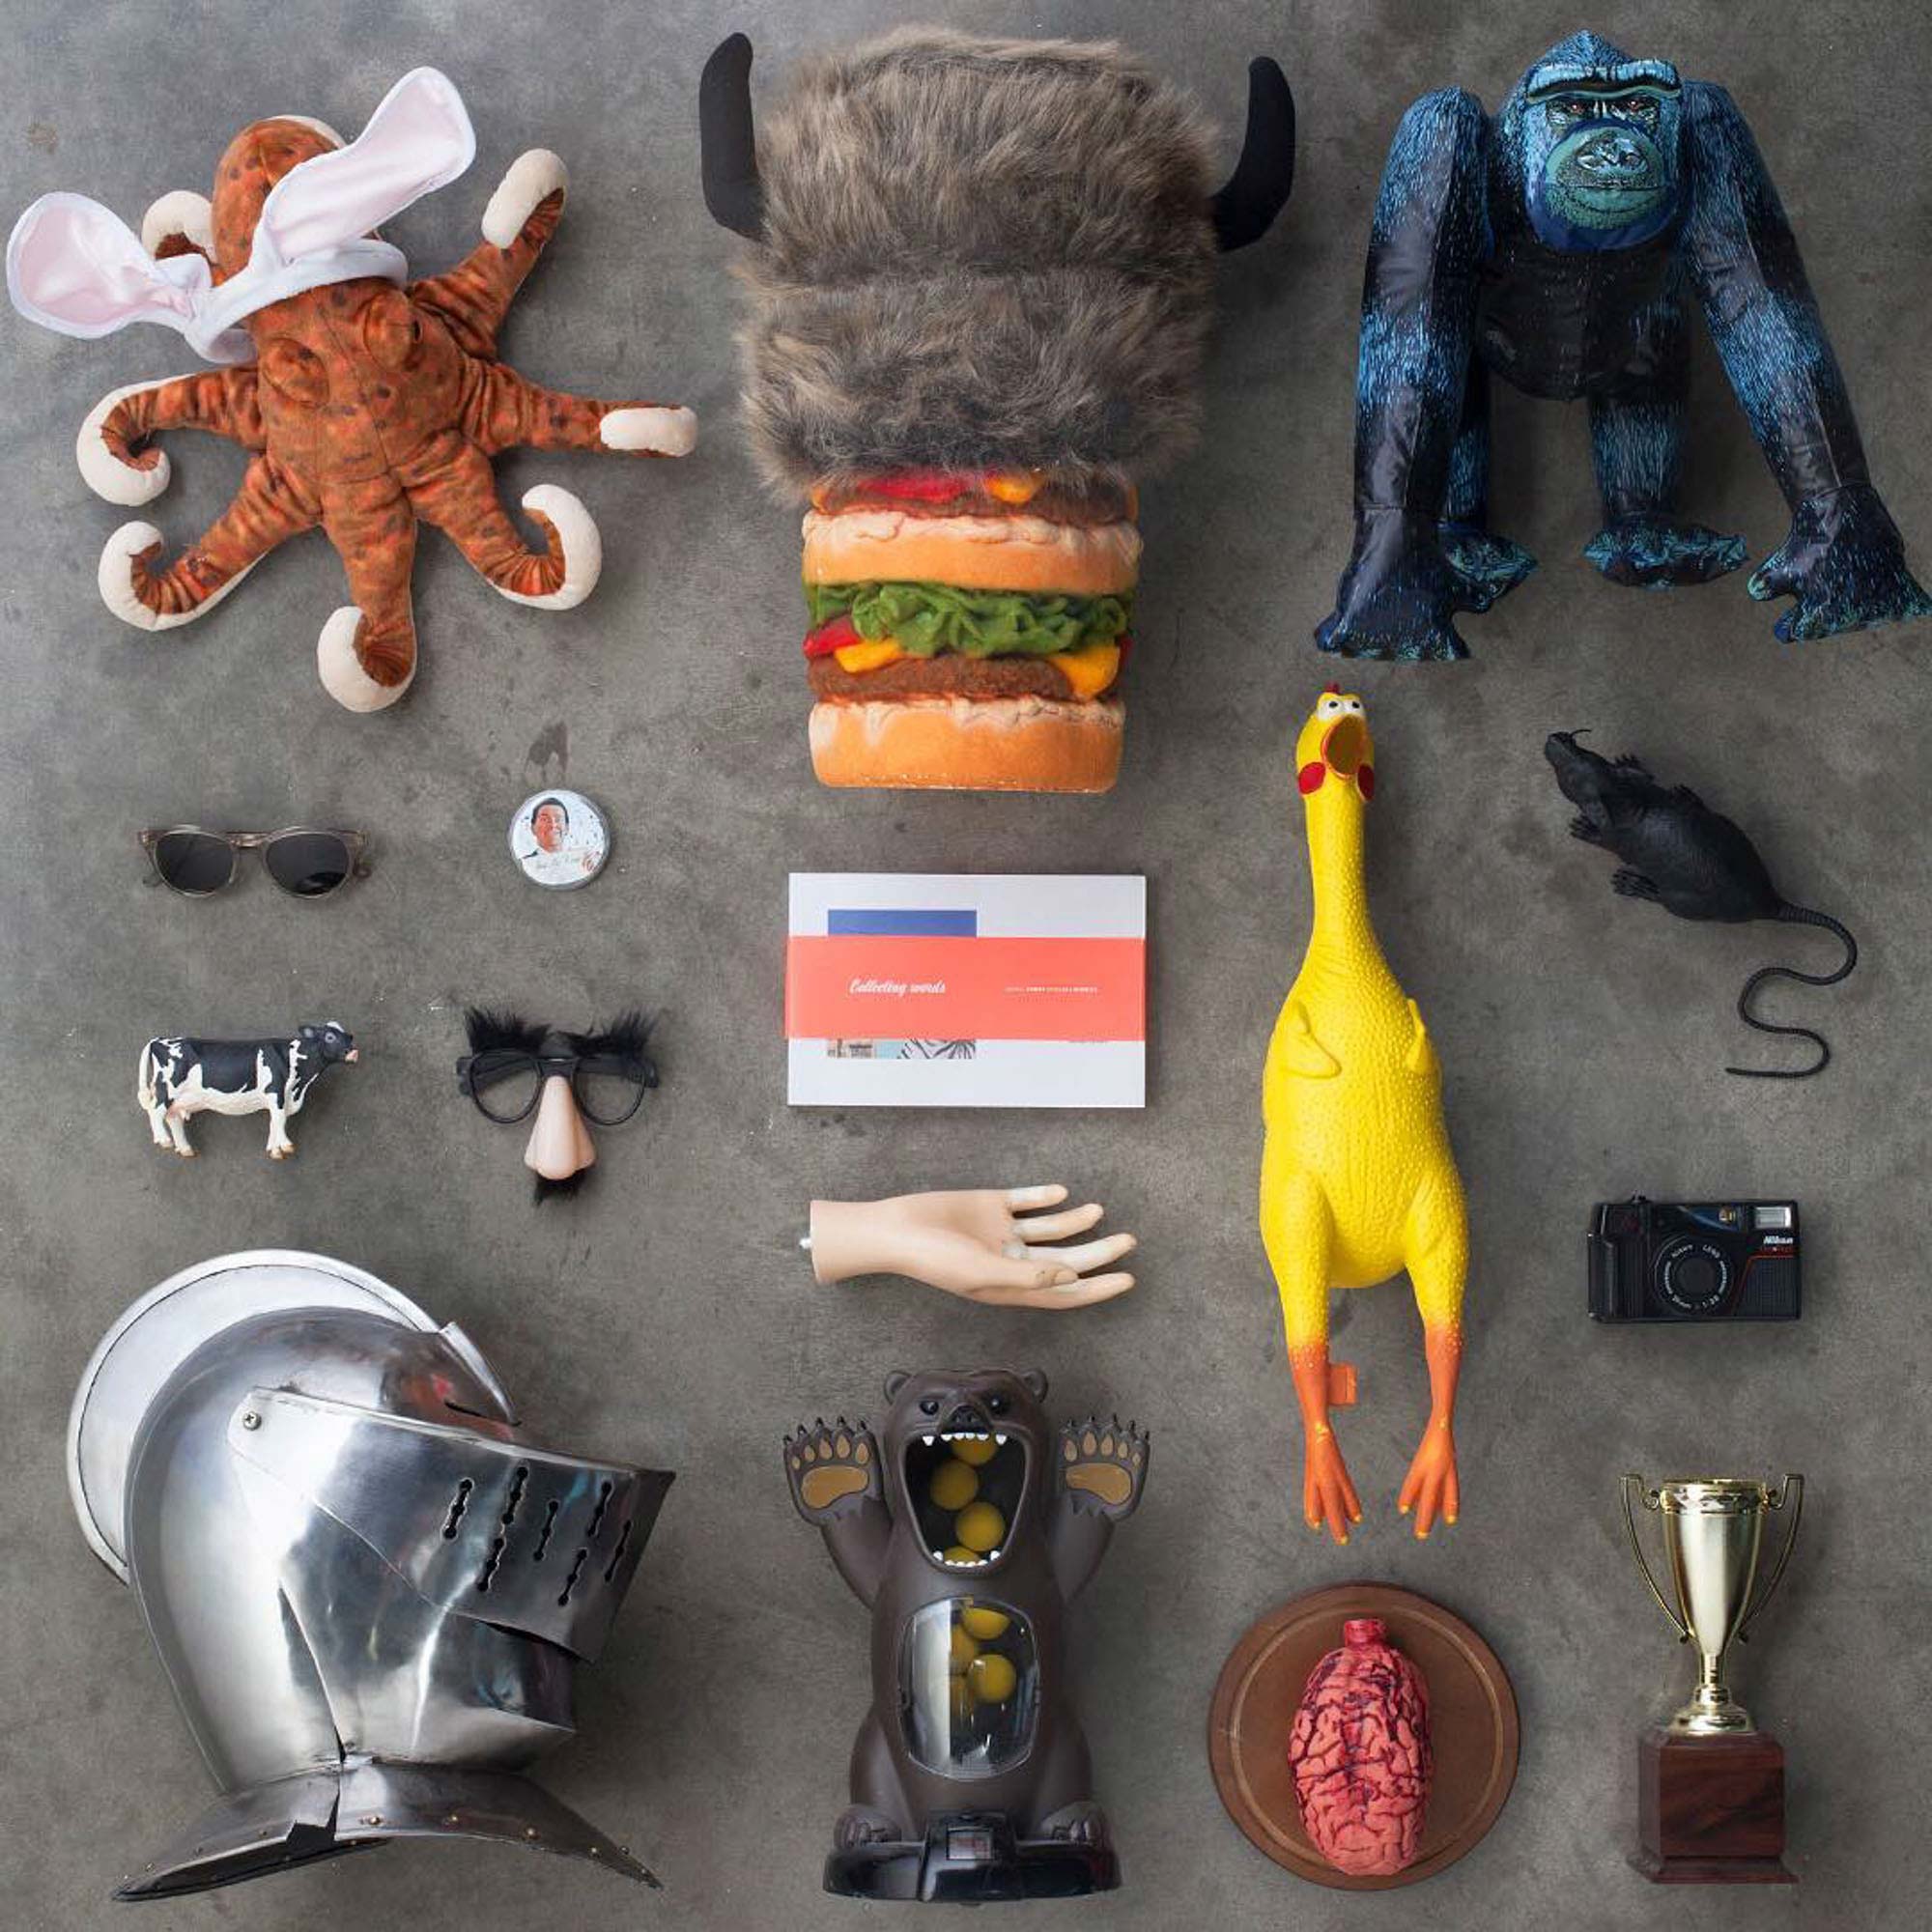 Knolling photography of items found on an art director's desk | Still Life Photography | shot in Boulder, Colorado for Crispin Porter + Bogusky